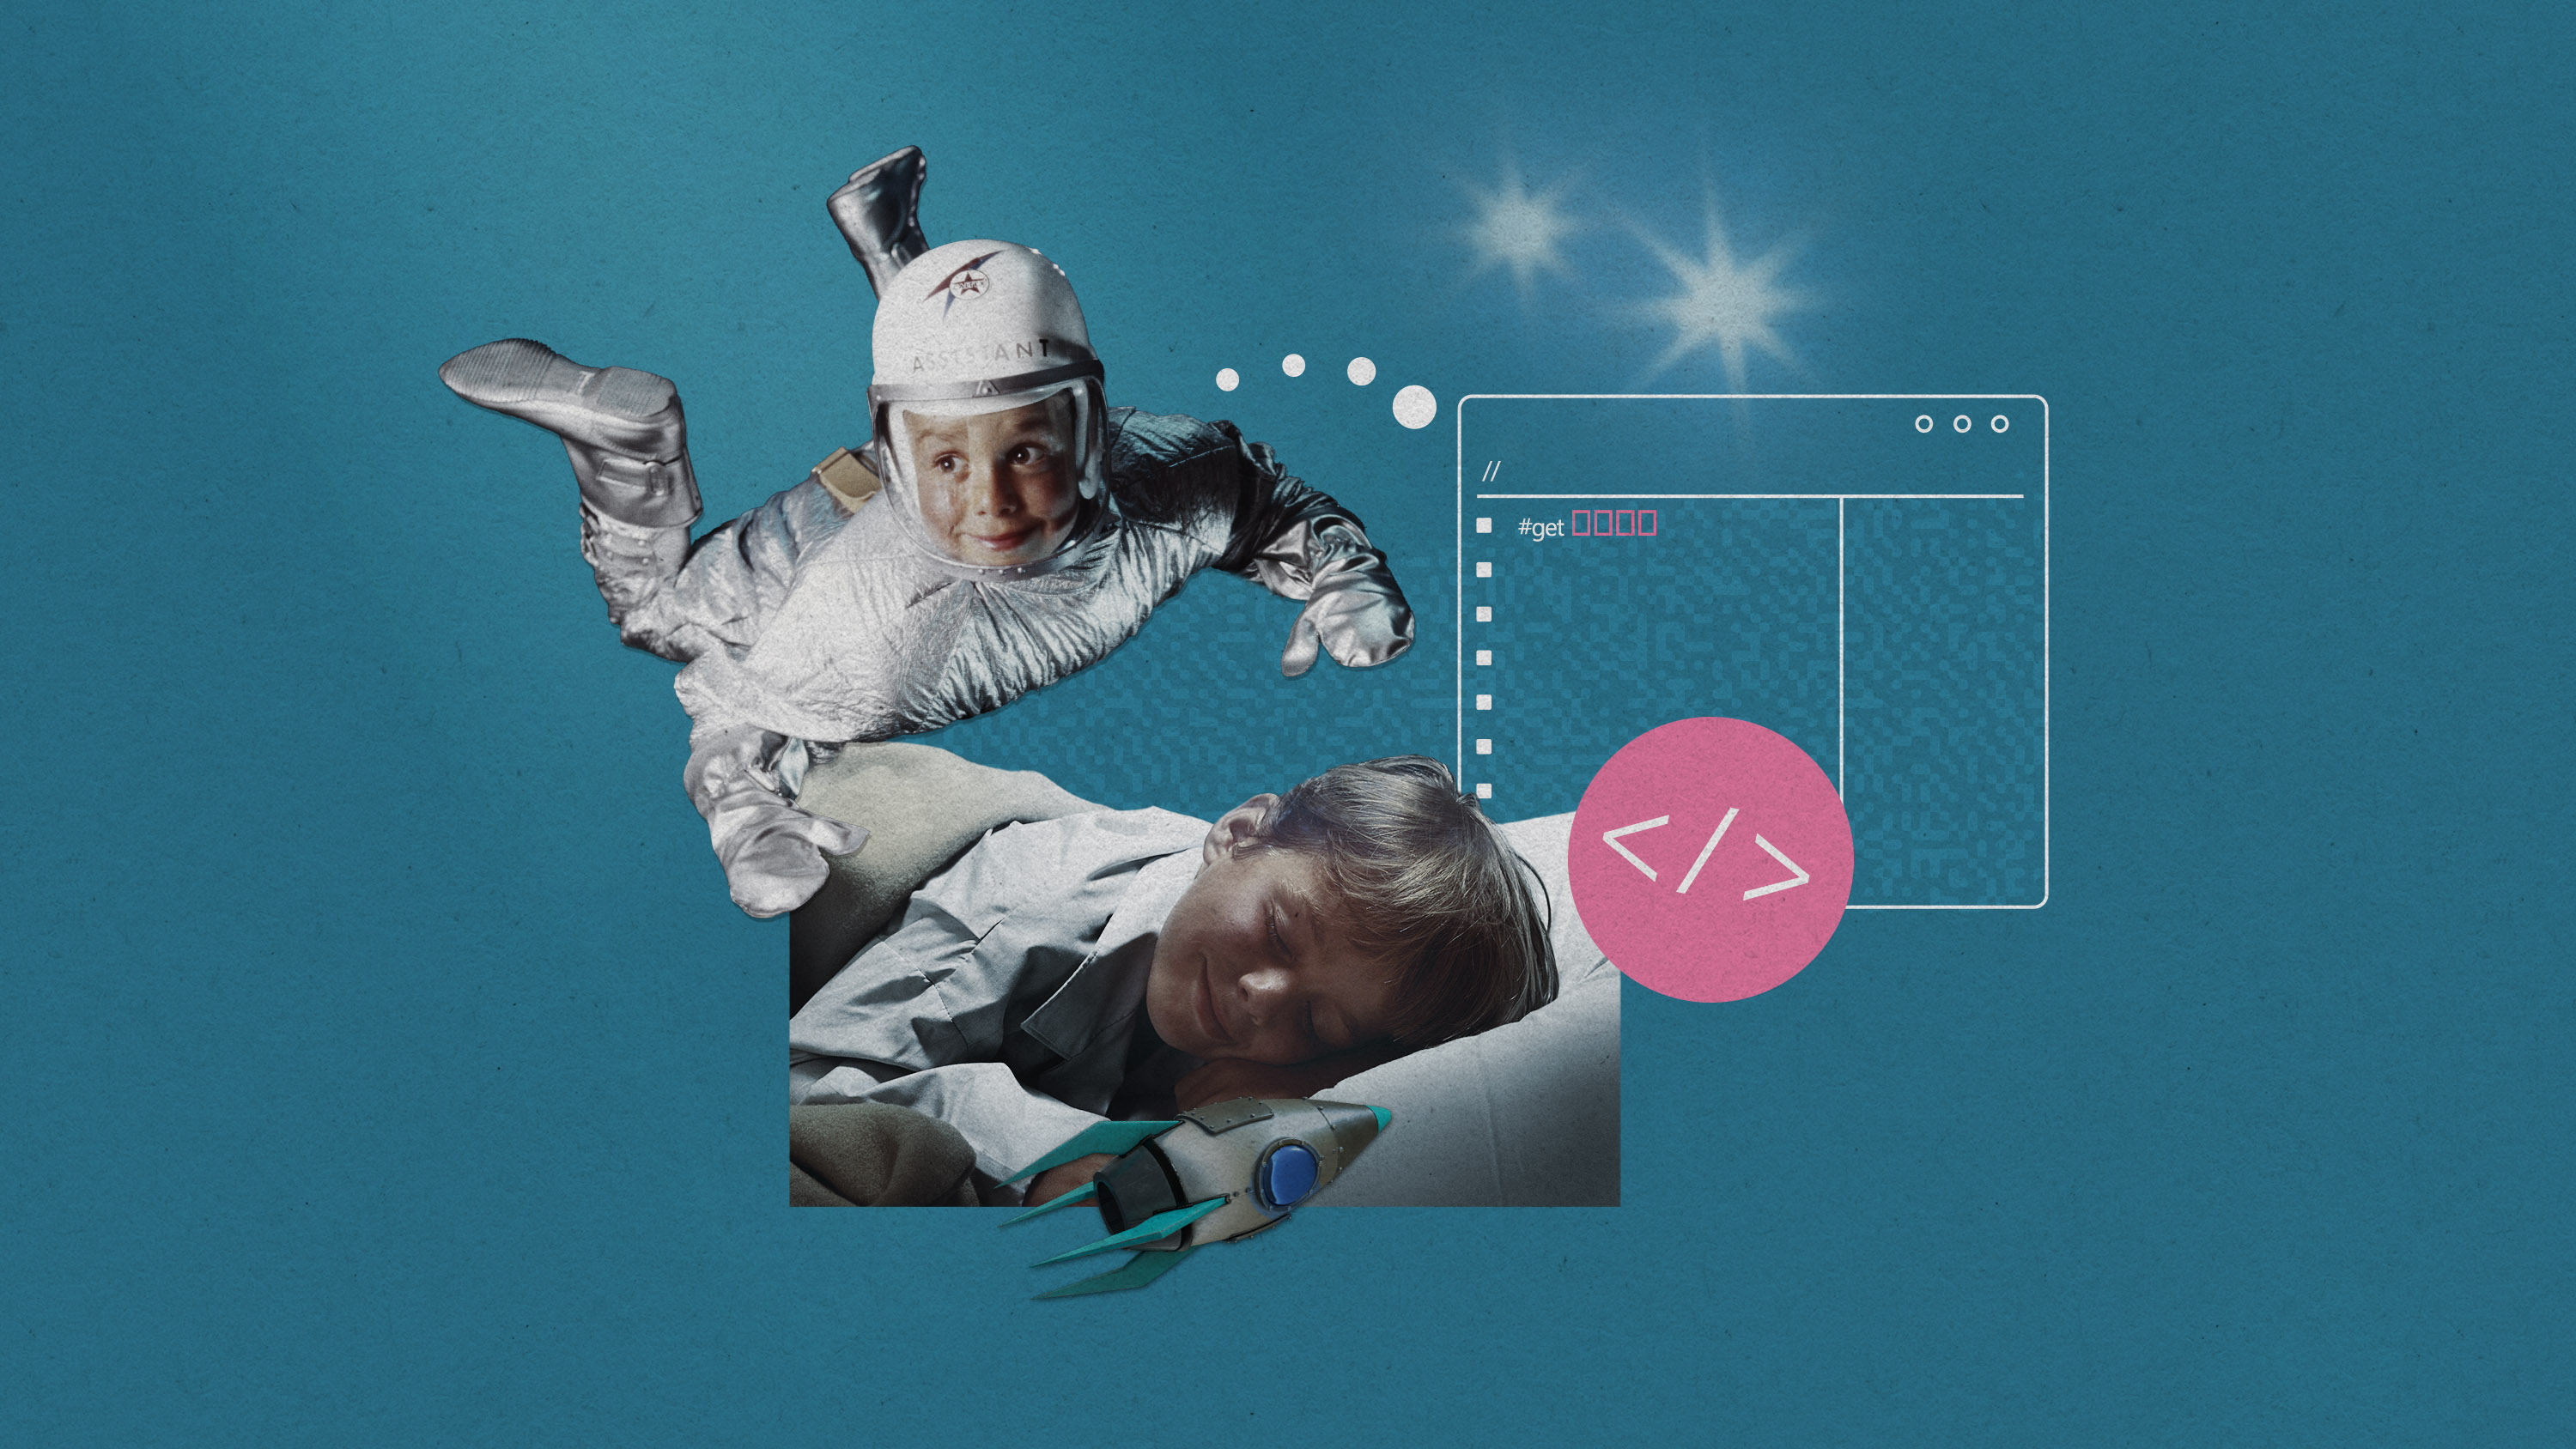 a sleeping boy dreaming of an astronaut self with "Assistant" on his space helmet who is dreaming of a code window